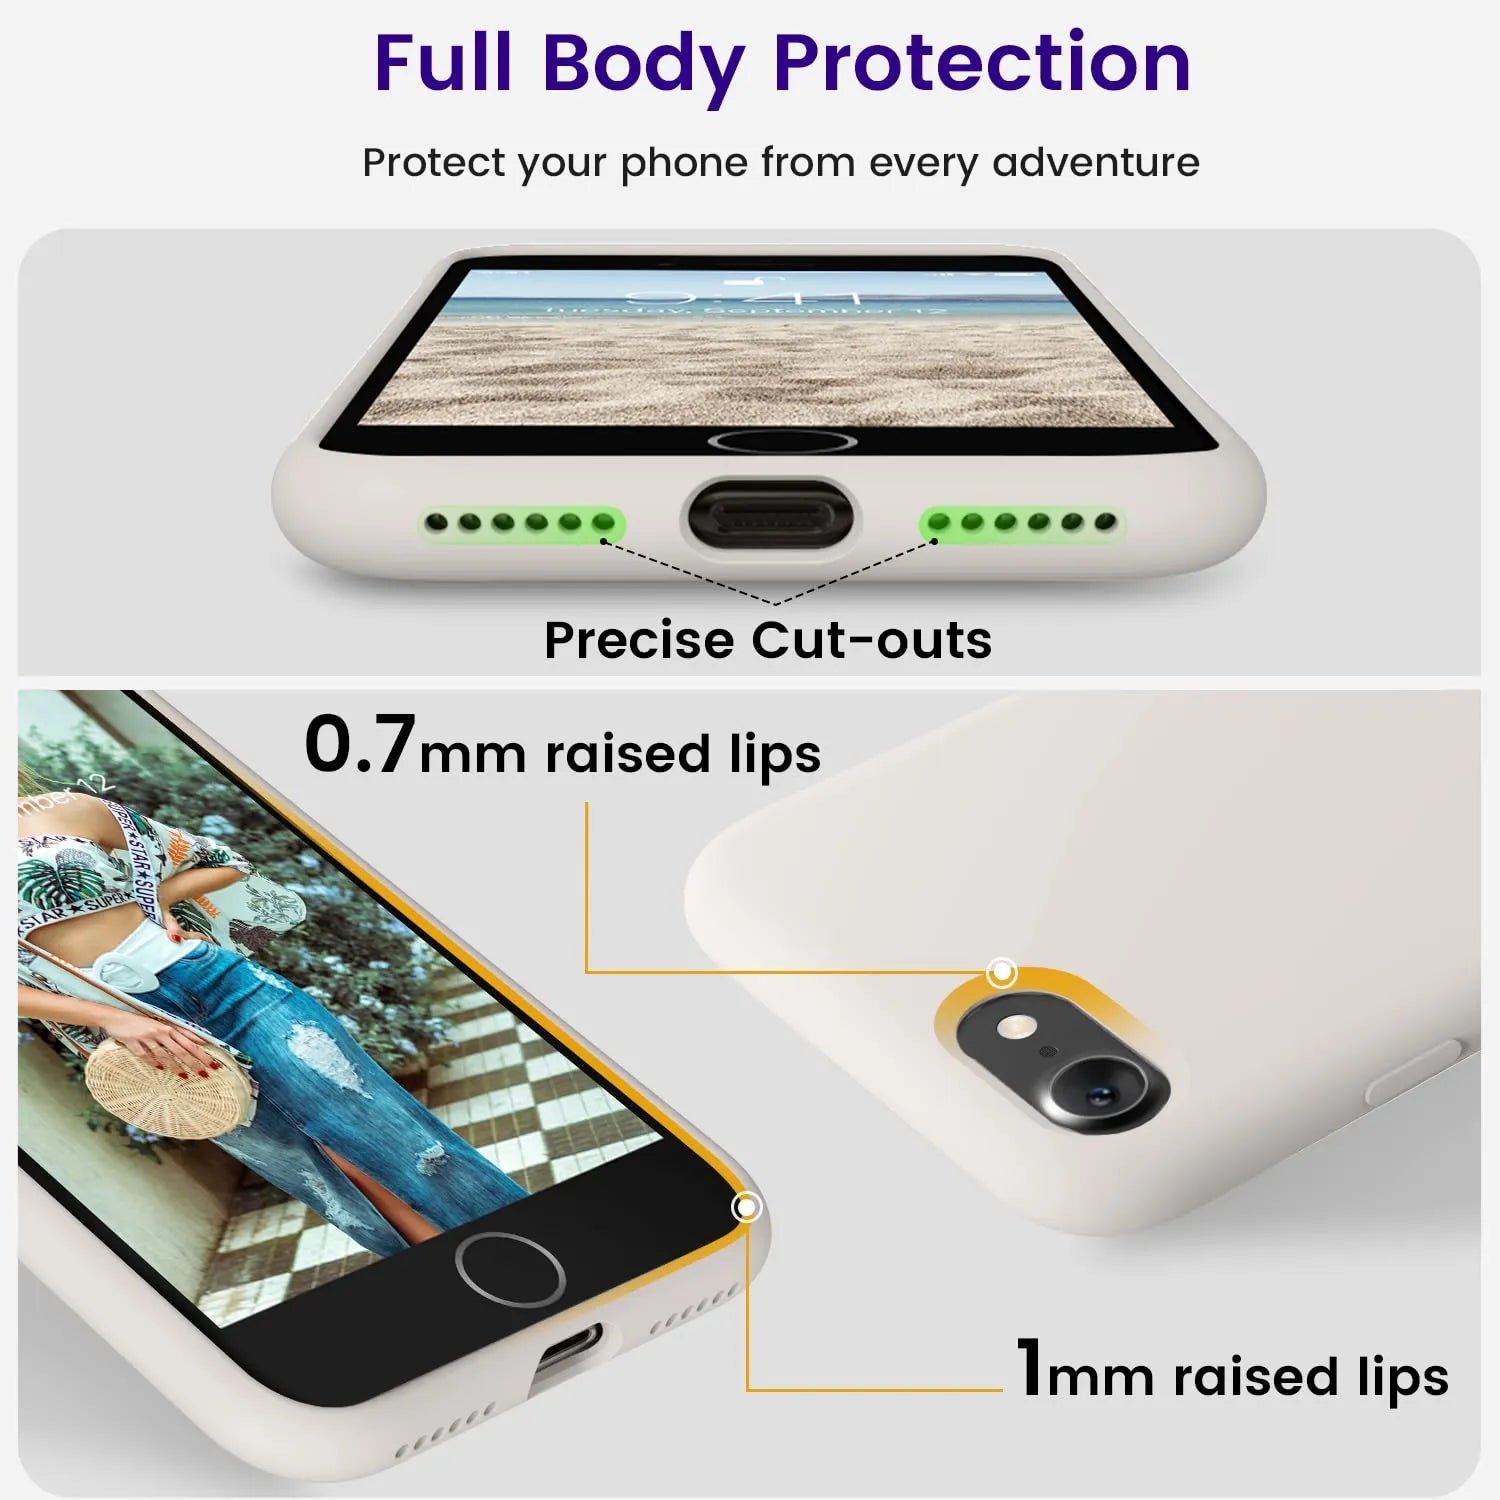 iPhone Silicone Cases & Protection- OTOFLY